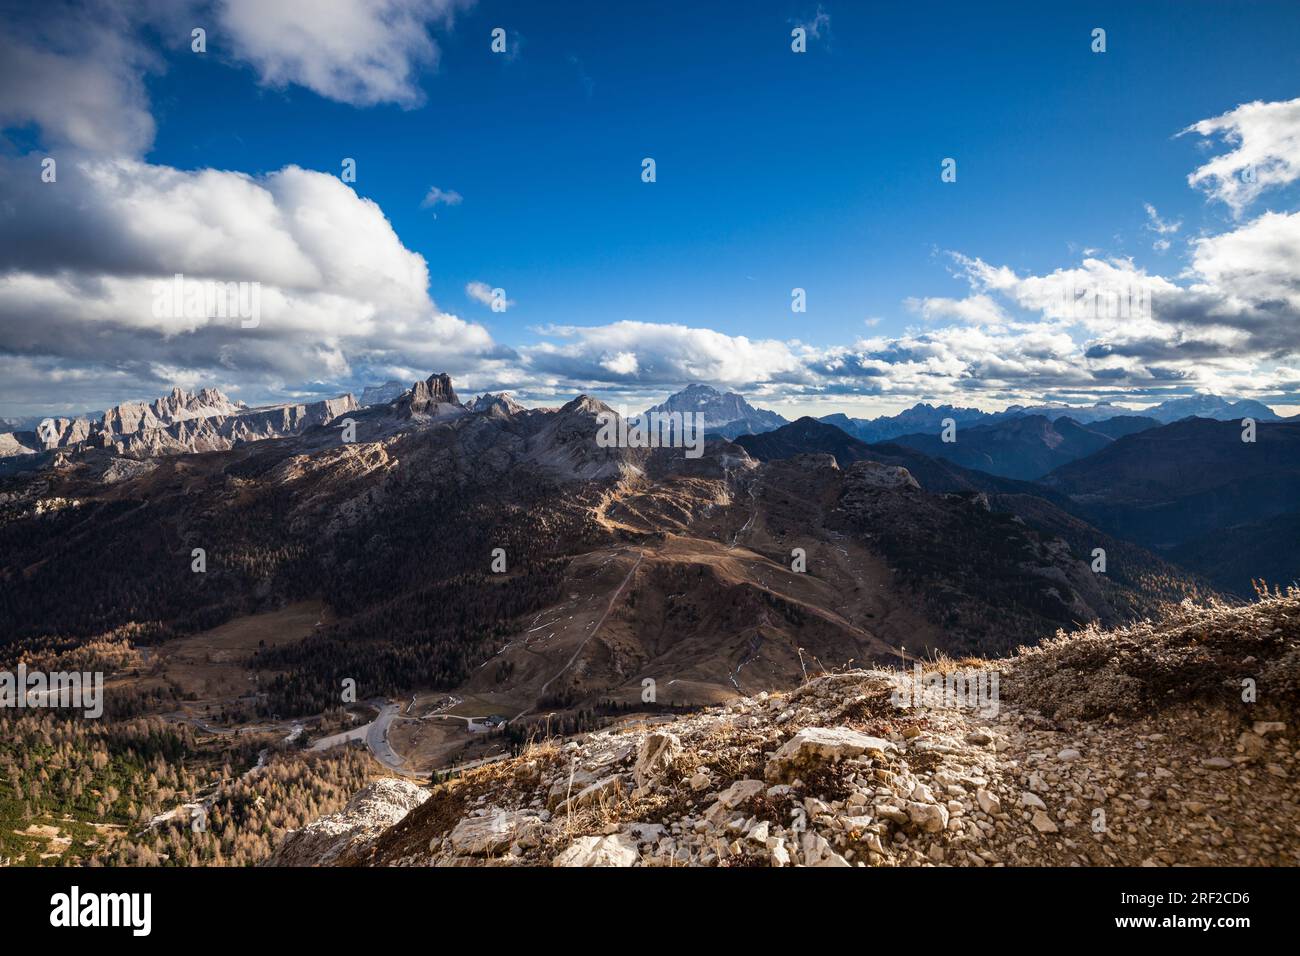 Alpine mountain landscape panorama at cloudy day Stock Photo